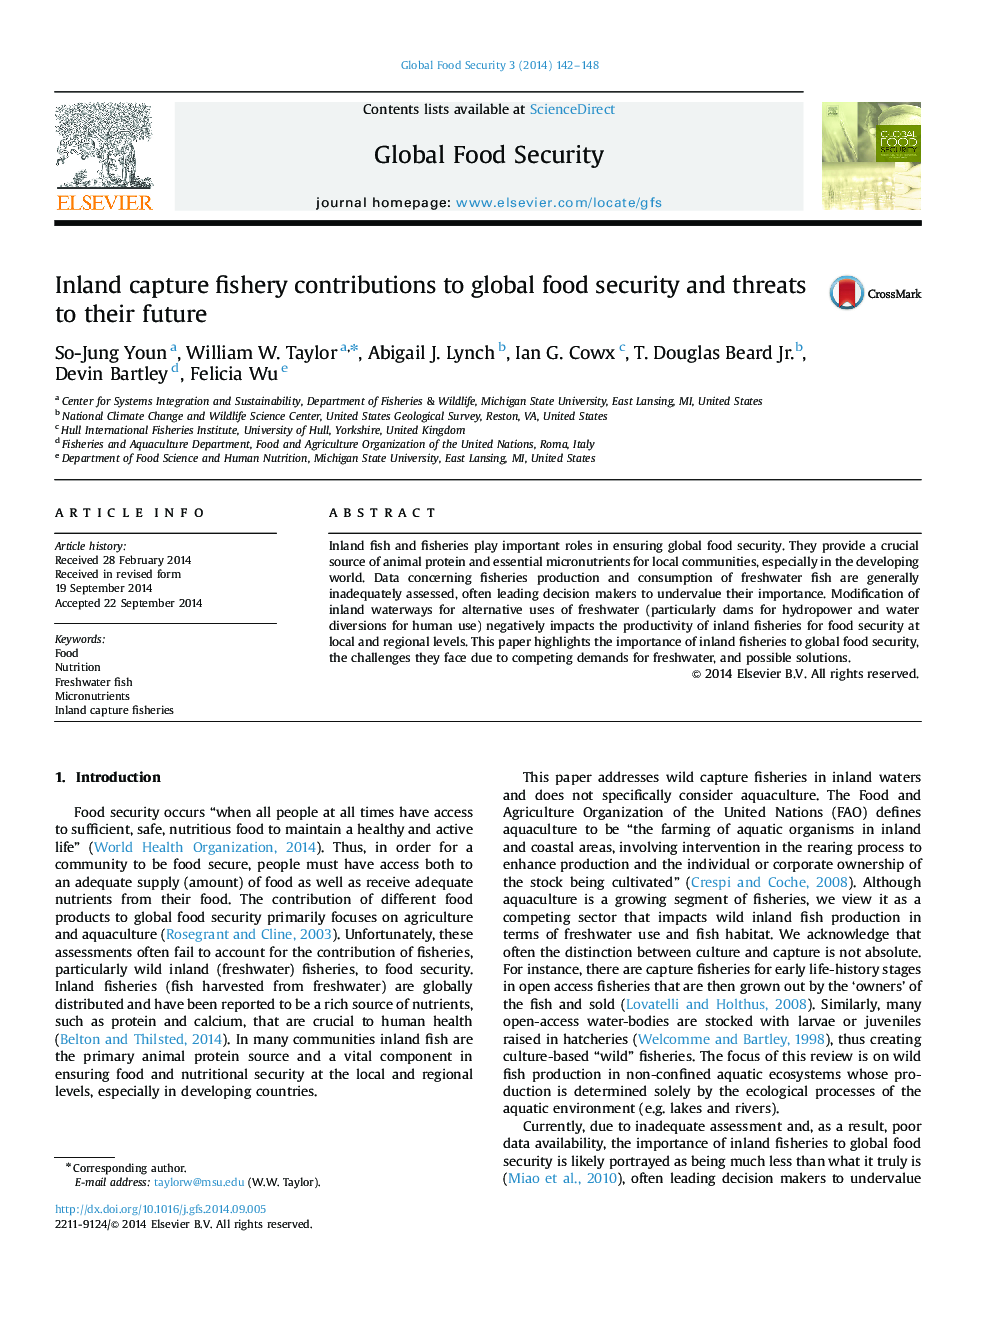 Inland capture fishery contributions to global food security and threats to their future